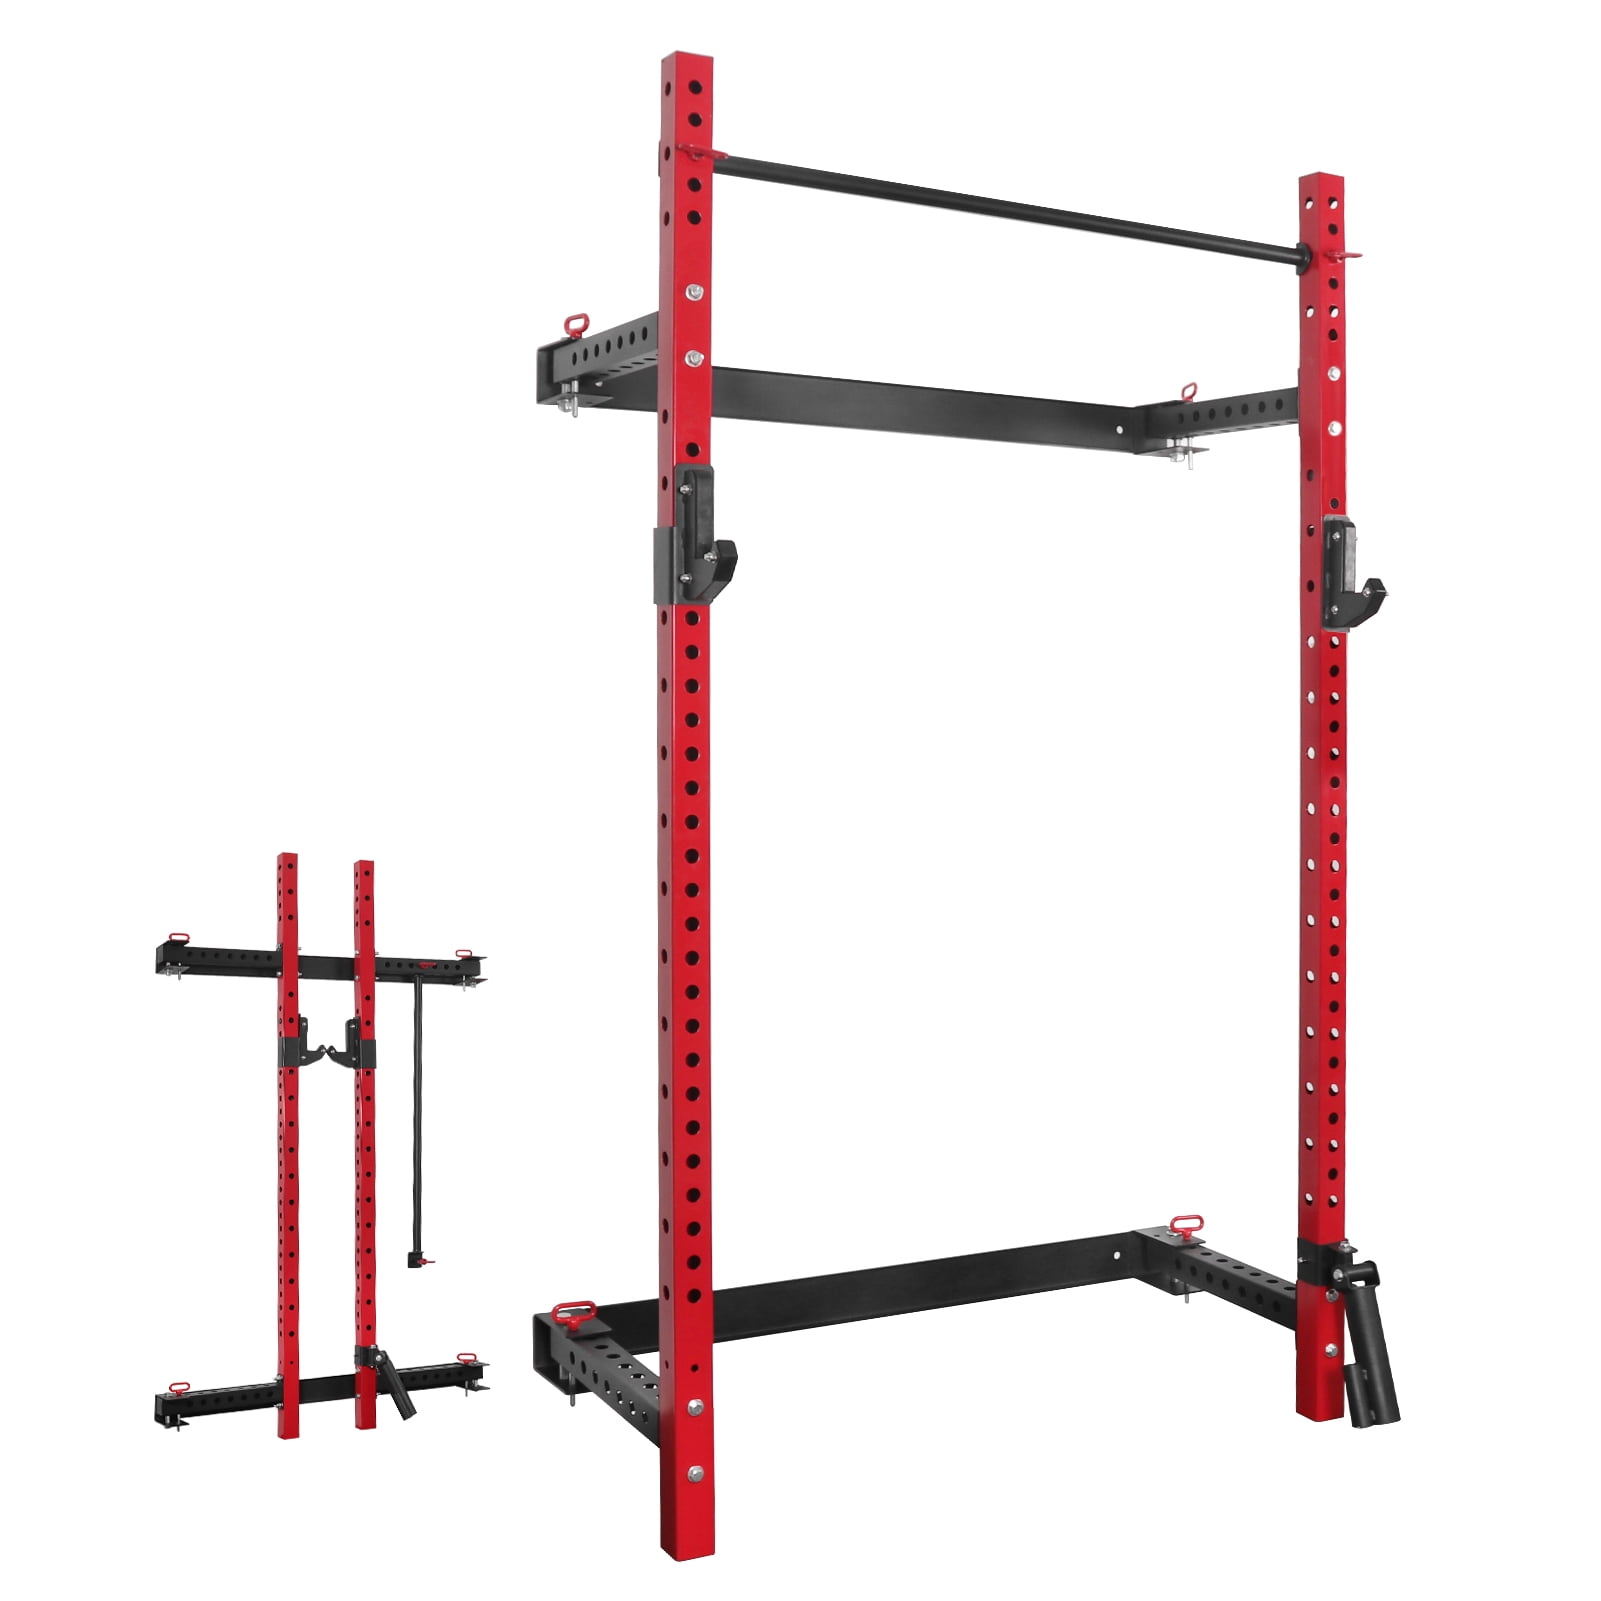 Signature Fitness 3” x 3” Wall Mounted Fold-in Power Cage Squat Rack with Adjustable Pull Up Bar and J Hooks Red Space-Saving Home Gym 